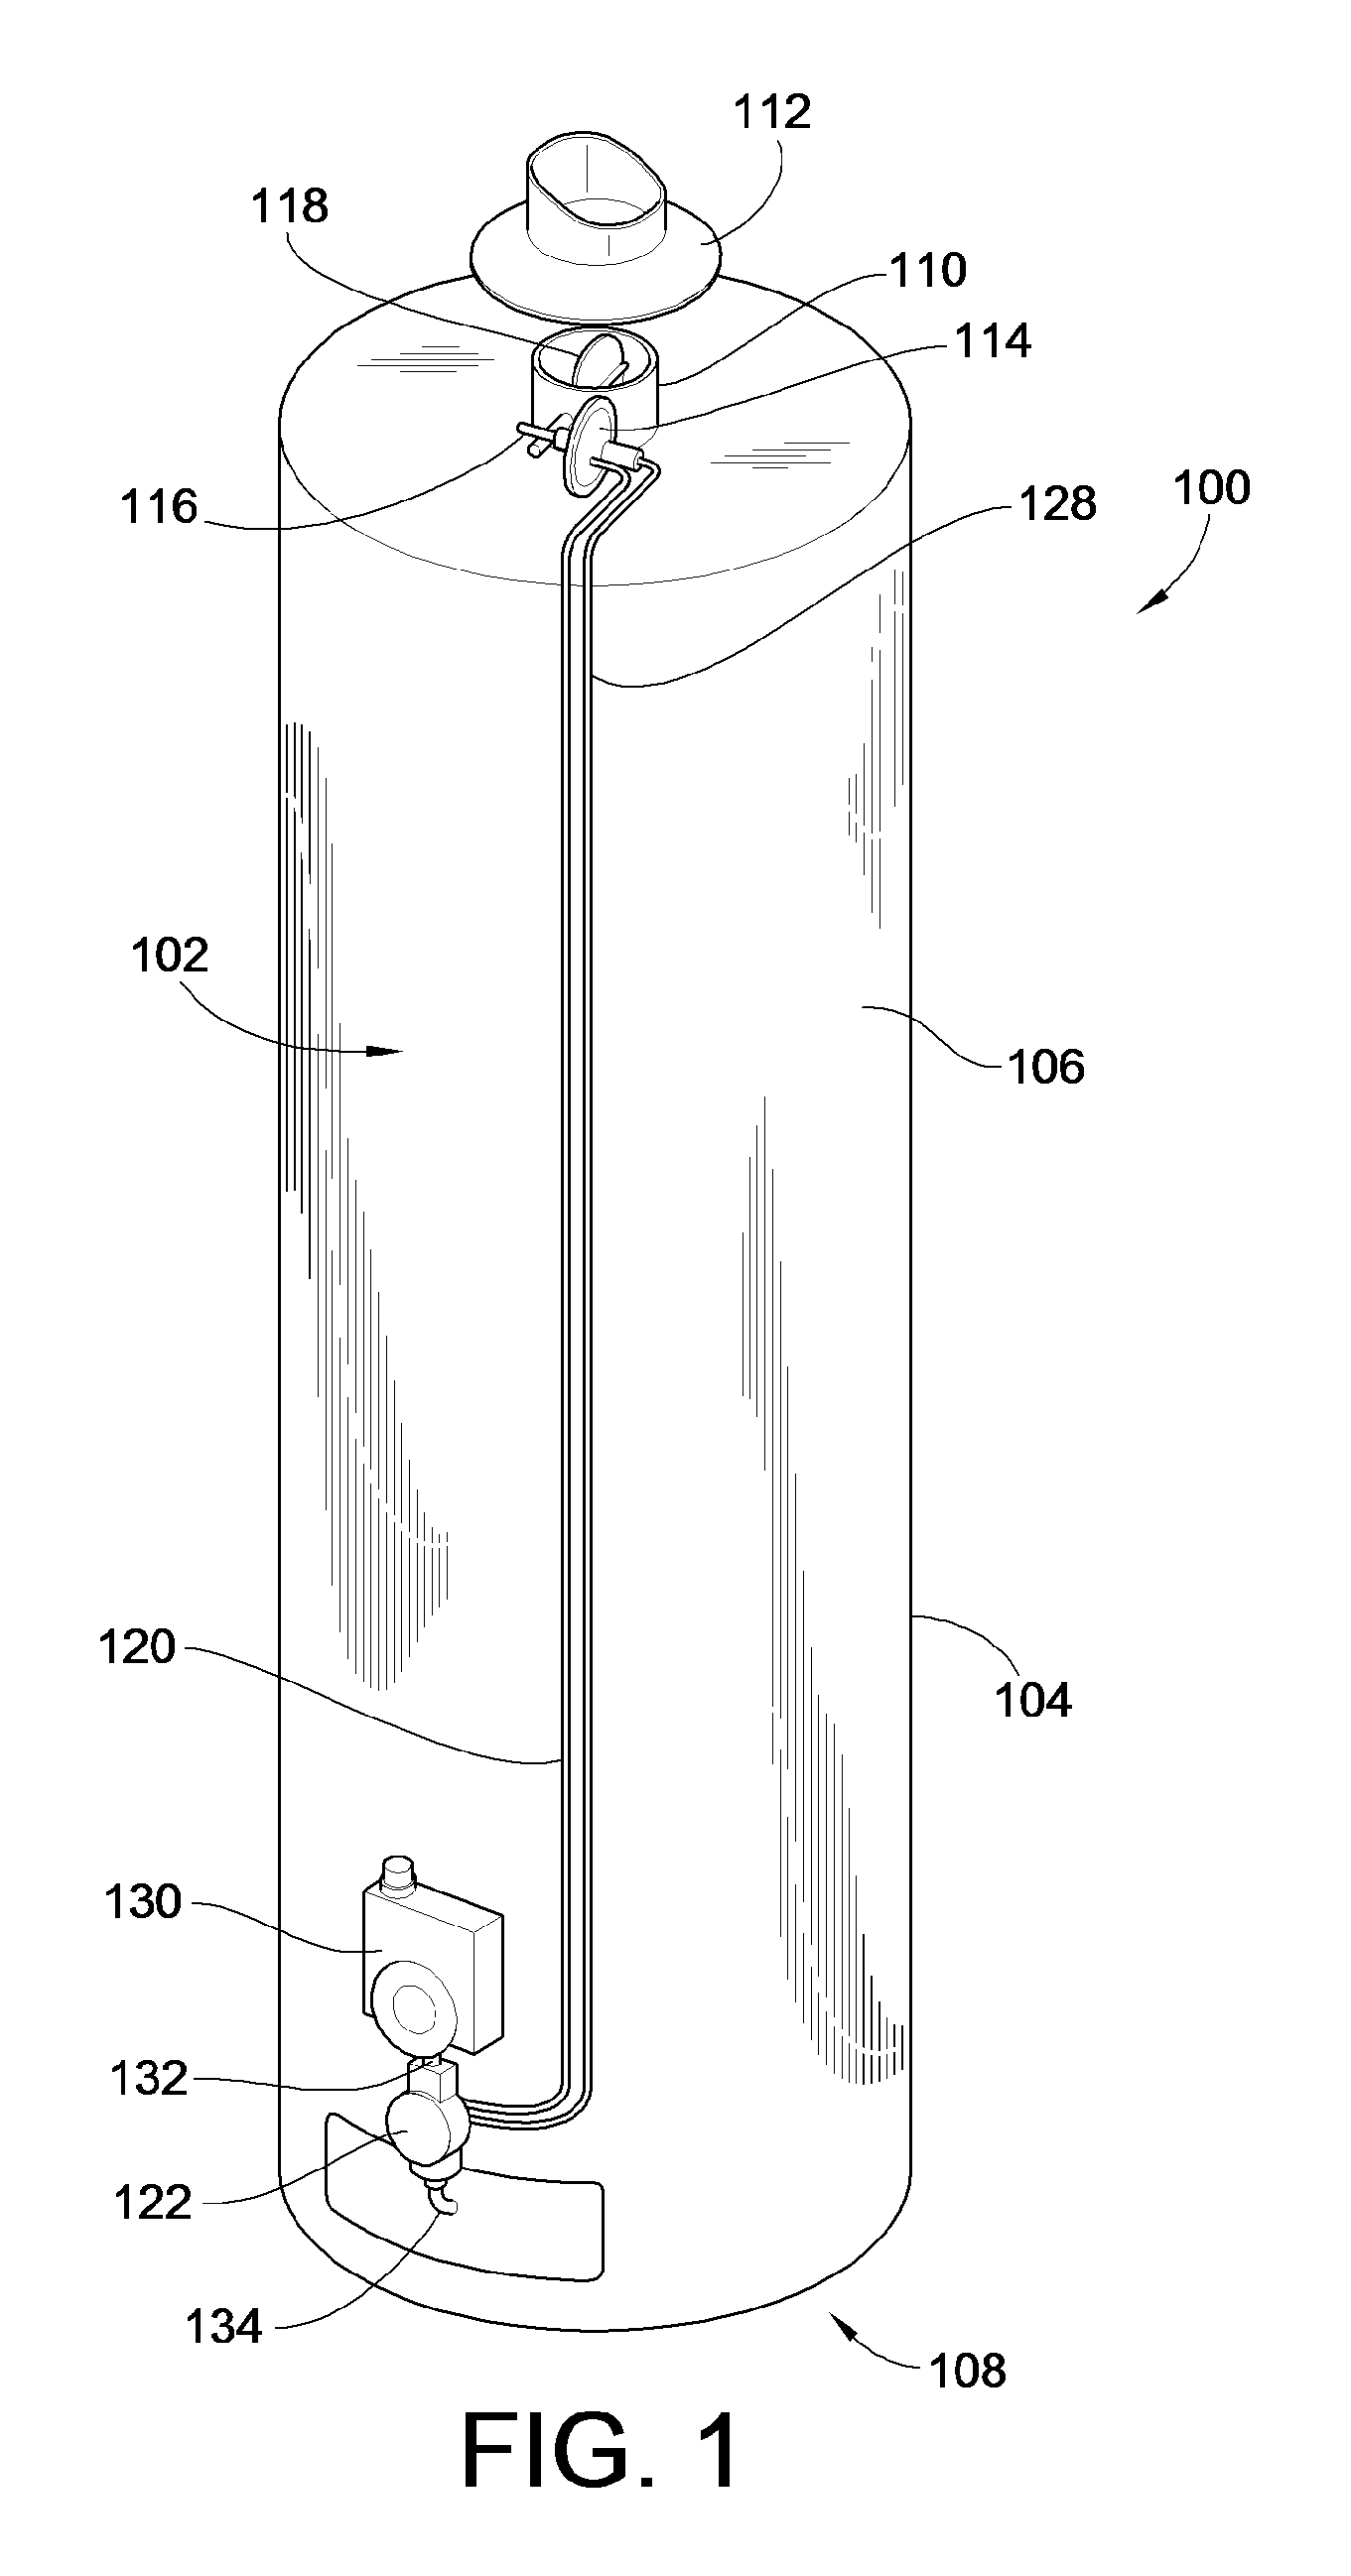 System and Method to Reduce Standby Energy Loss in a Gas Burning Appliance